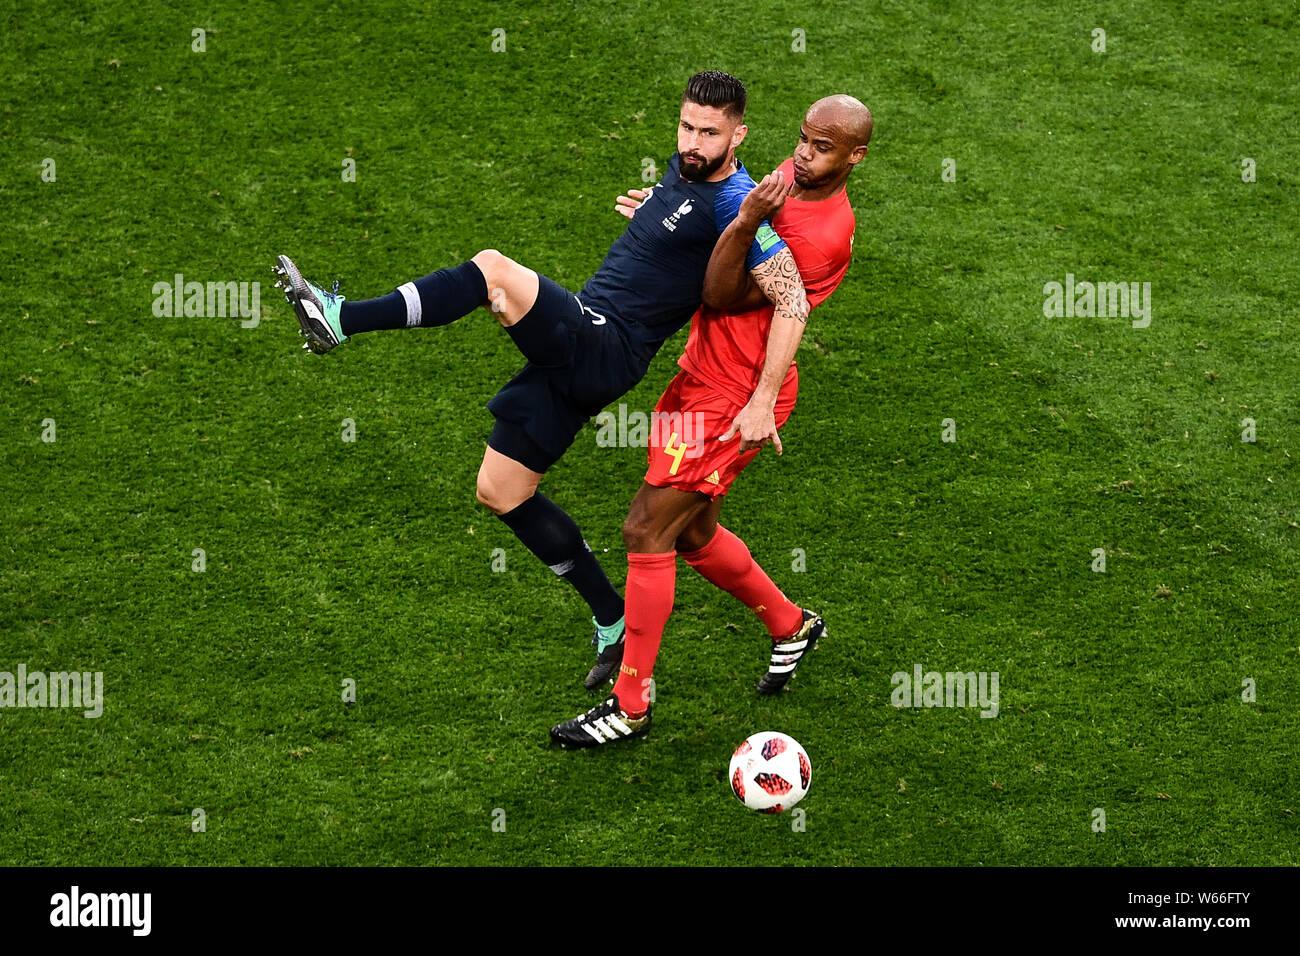 Vincent Kompany of Belgium, right, challenges Olivier Giroud of France in their semifinal match during the 2018 FIFA World Cup in Saint Petersburg, Ru Stock Photo